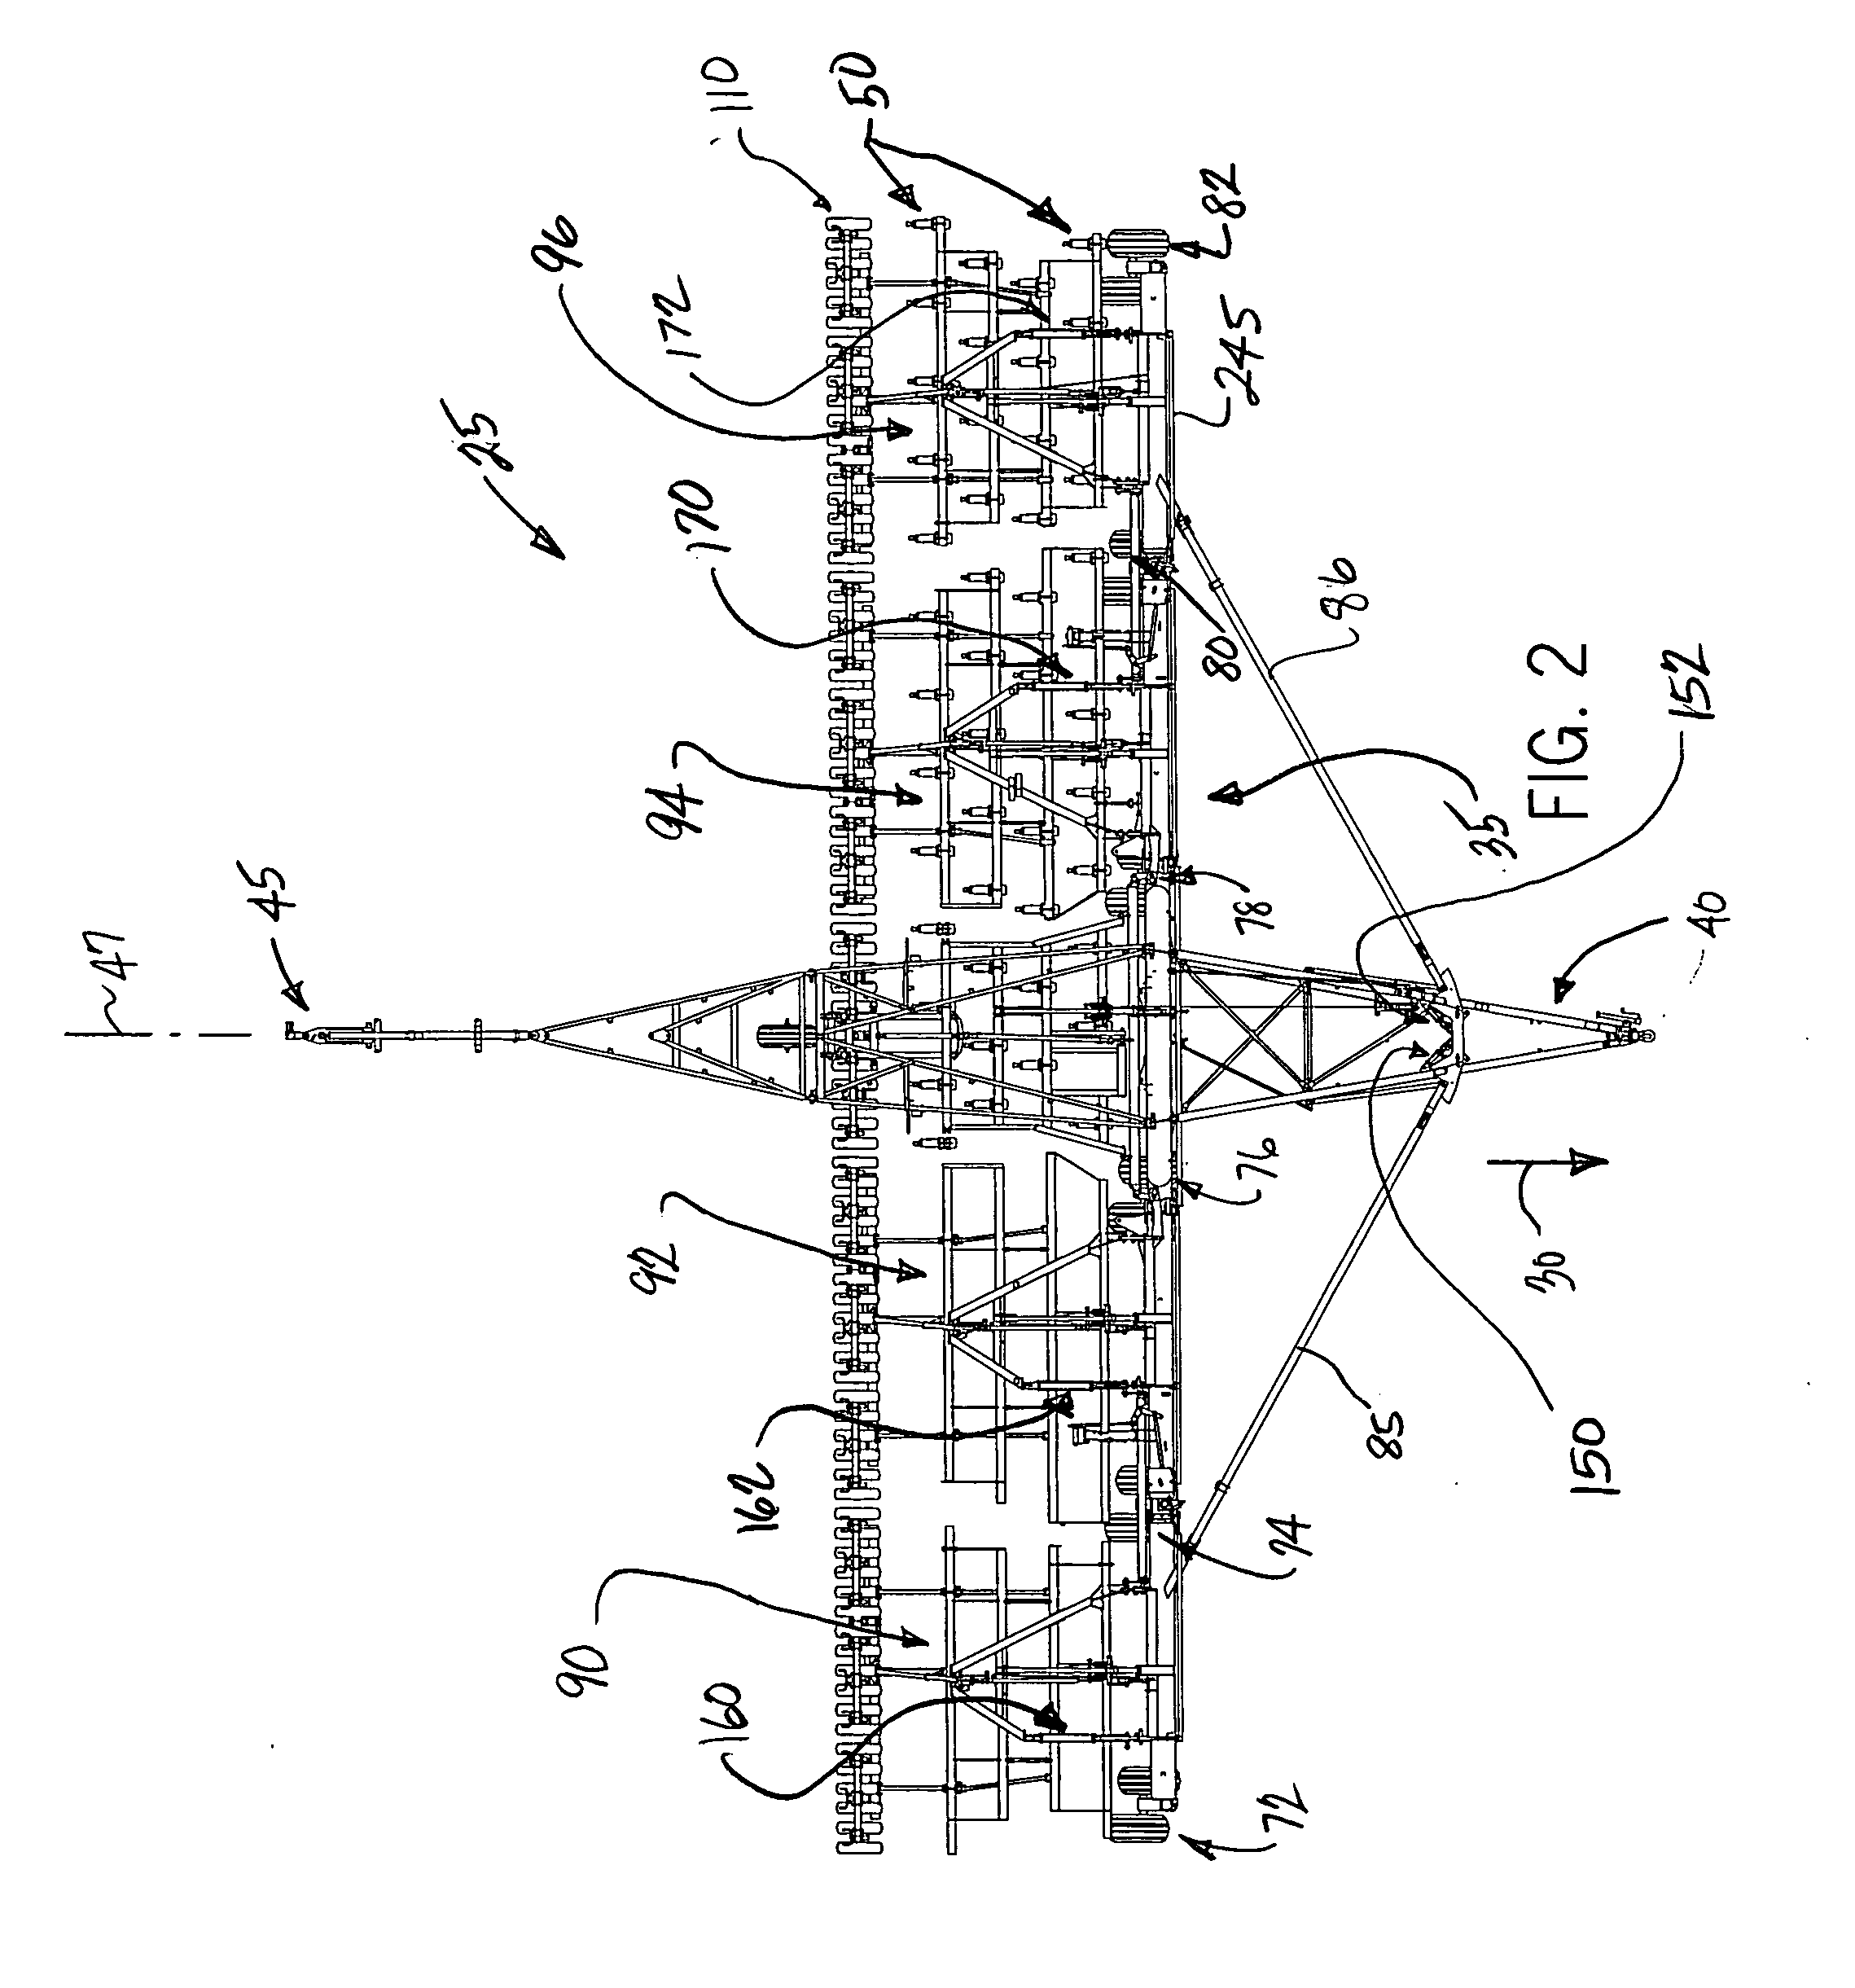 System for and method of moving an agricultural implement between a folded, inoperative position and an extended, operative position